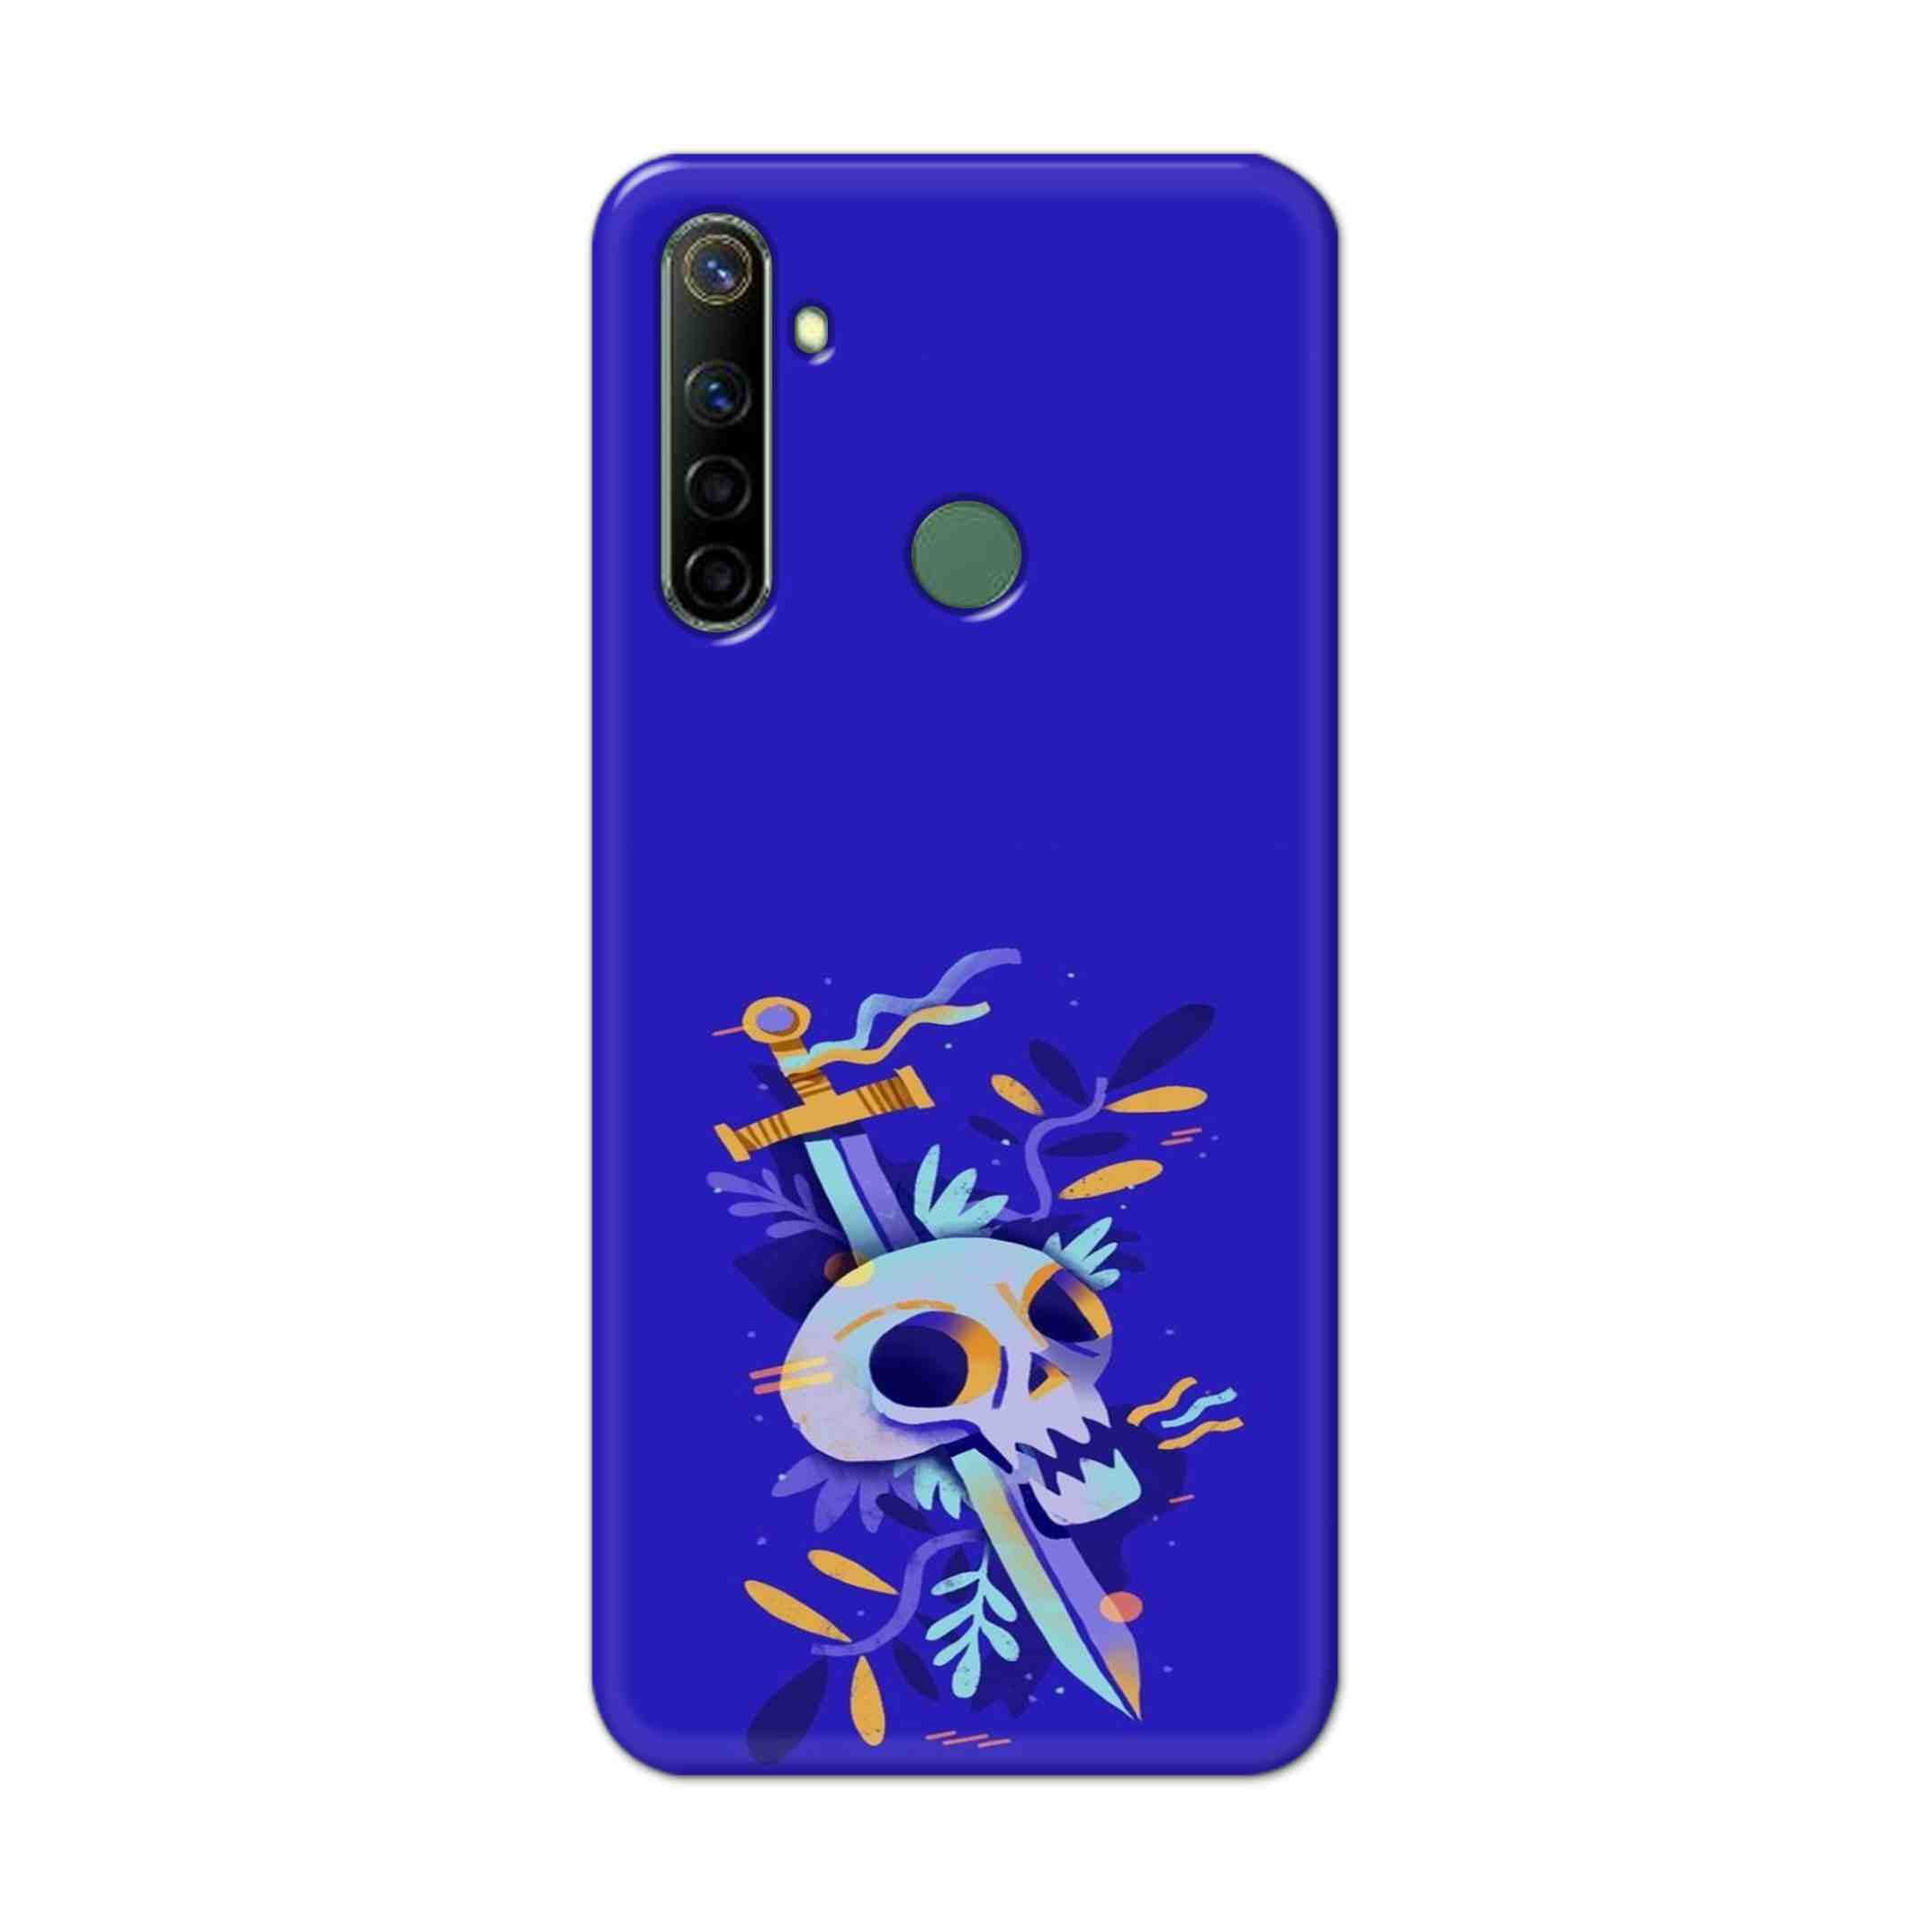 Buy Blue Skull Hard Back Mobile Phone Case Cover For Realme Narzo 10a Online